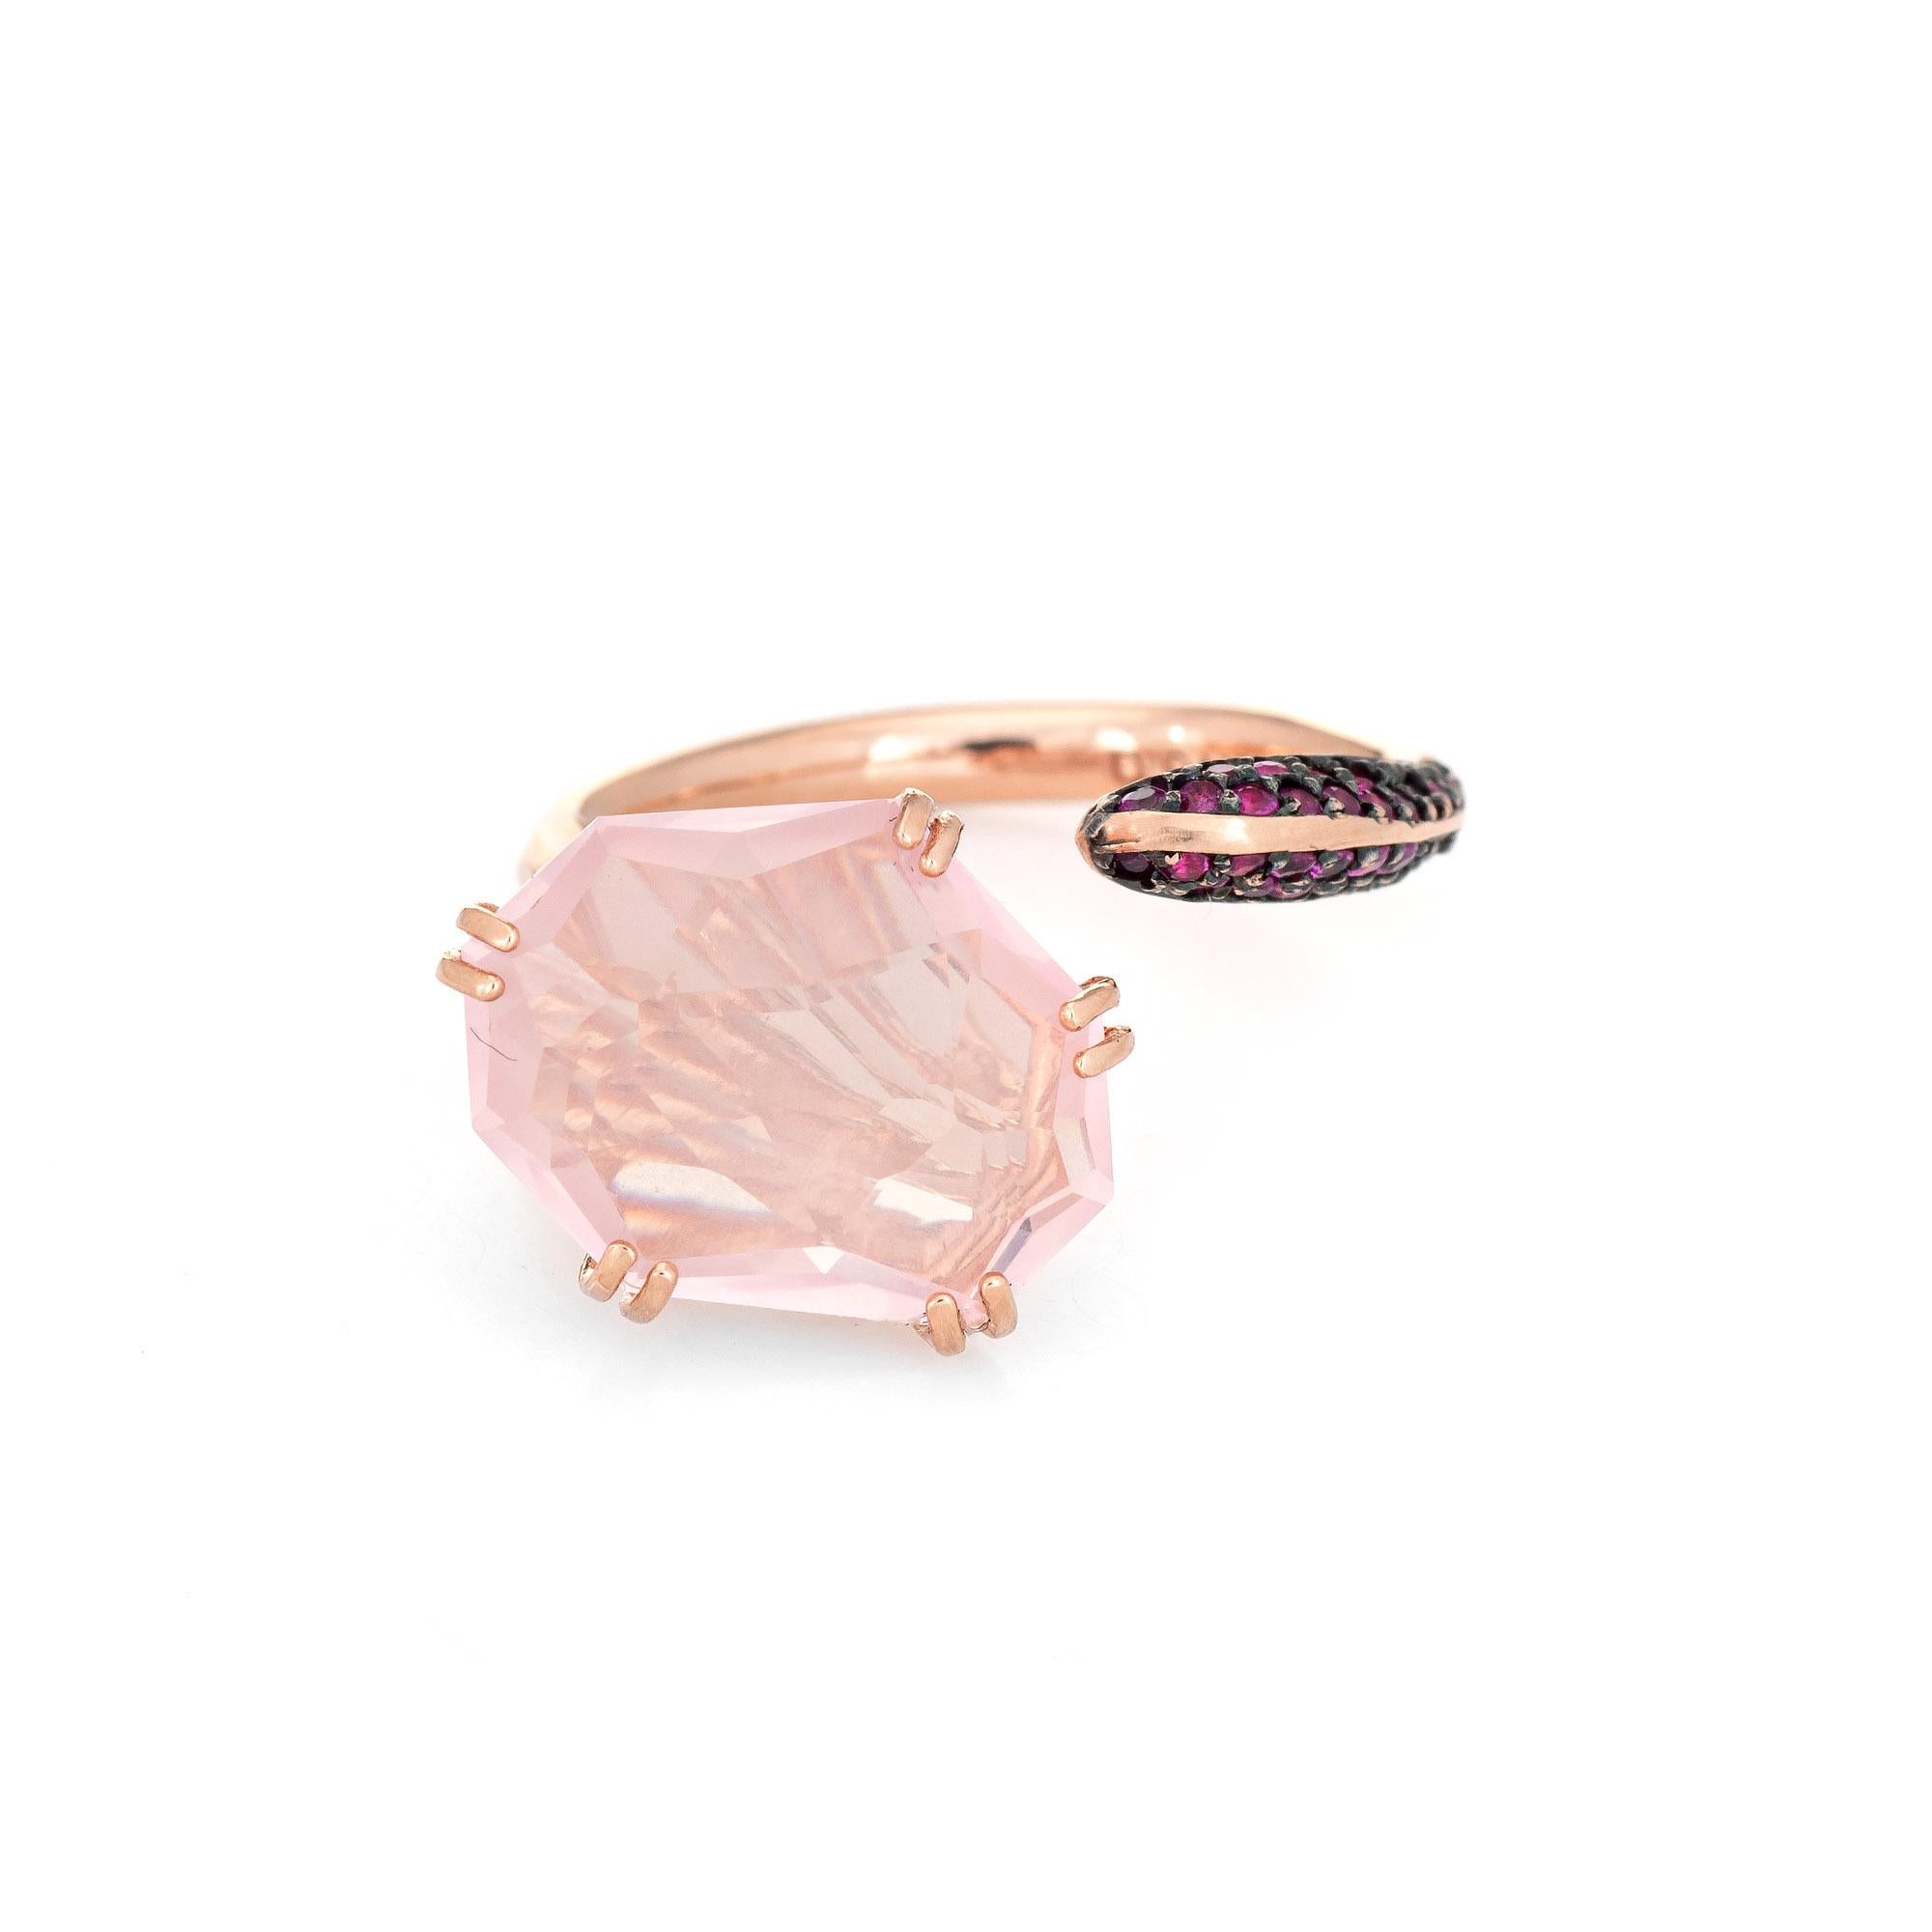 Stylish pre owned Didier Dubot rose quartz & ruby ring crafted in 14 karat rose gold. 

Faceted rose quartz measures 13mm x 10mm. 30 rubies total an estimated 0.15 carats. The rubies and quartz are in excellent condition and free of cracks or chips.